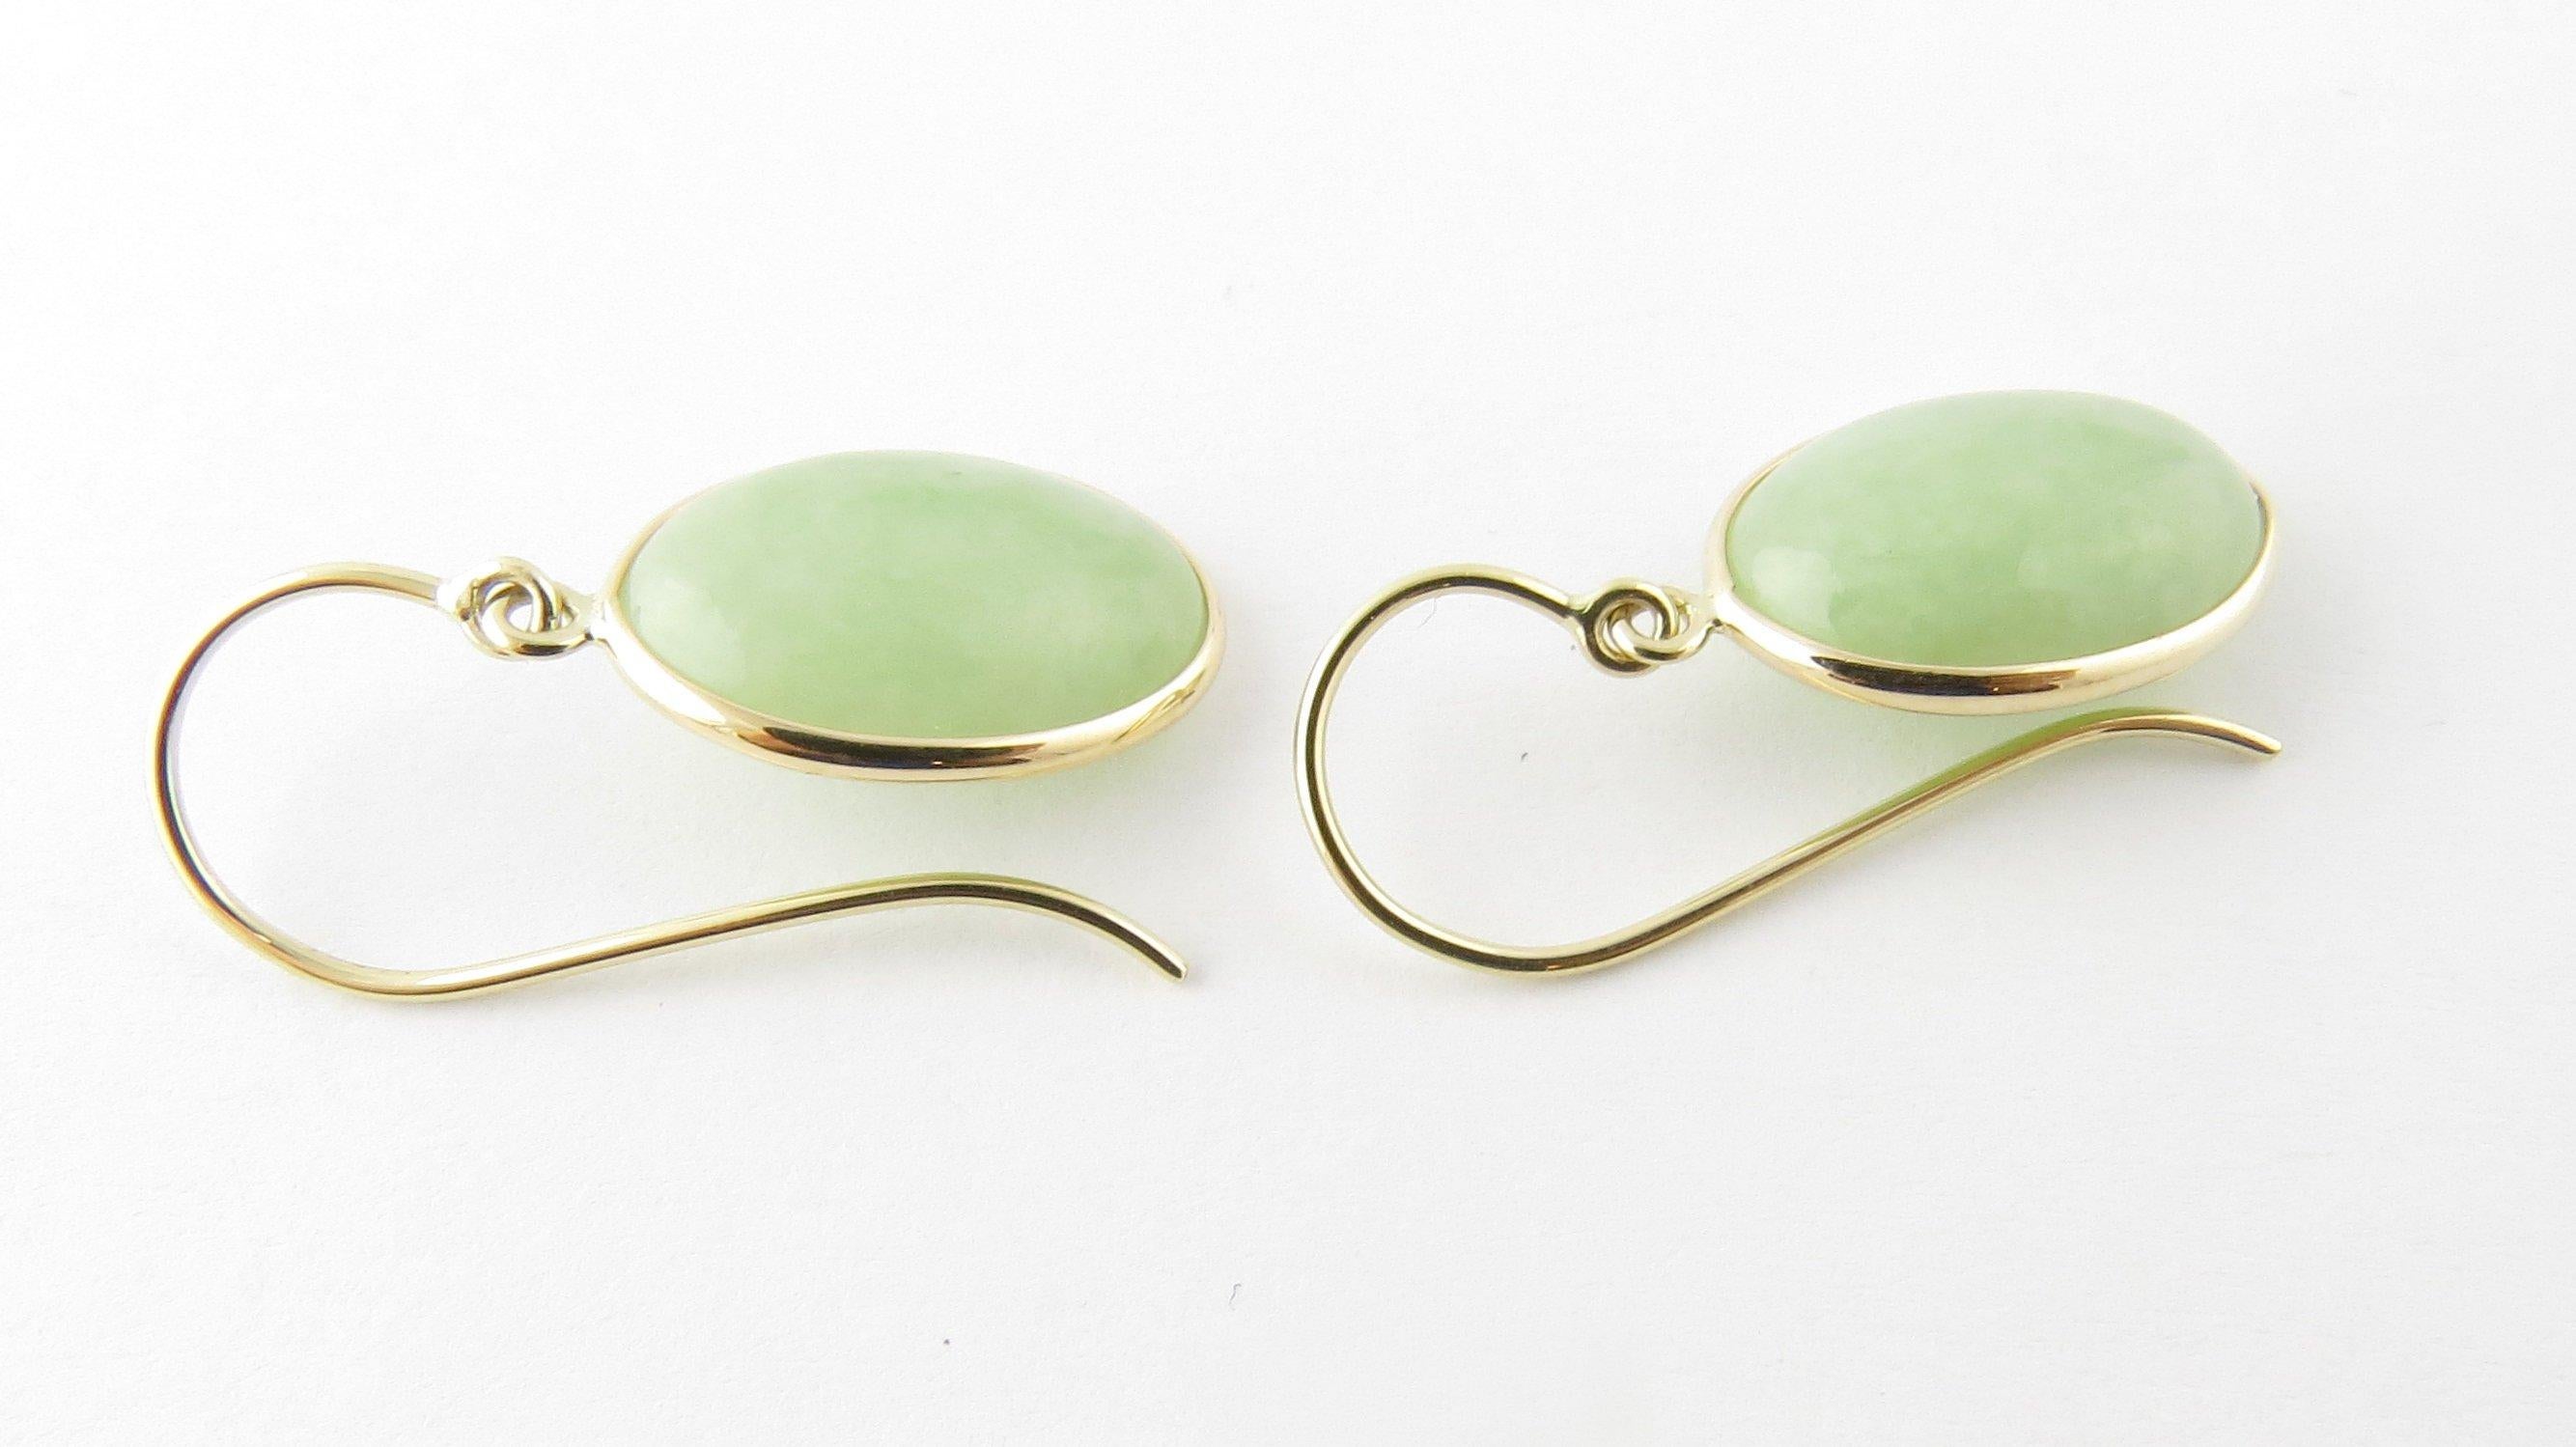 Vintage 14 Karat Yellow Gold Jade Earrings- 
These lovely dangling earrings each feature one oval jade stone (15 mm x 11 mm) set in classic 14K yellow gold. French wire closures. 
Size: 25 mm x 11 mm 
Weight: 1.8 dwt. / 2.8 gr. 
Hallmark: Acid